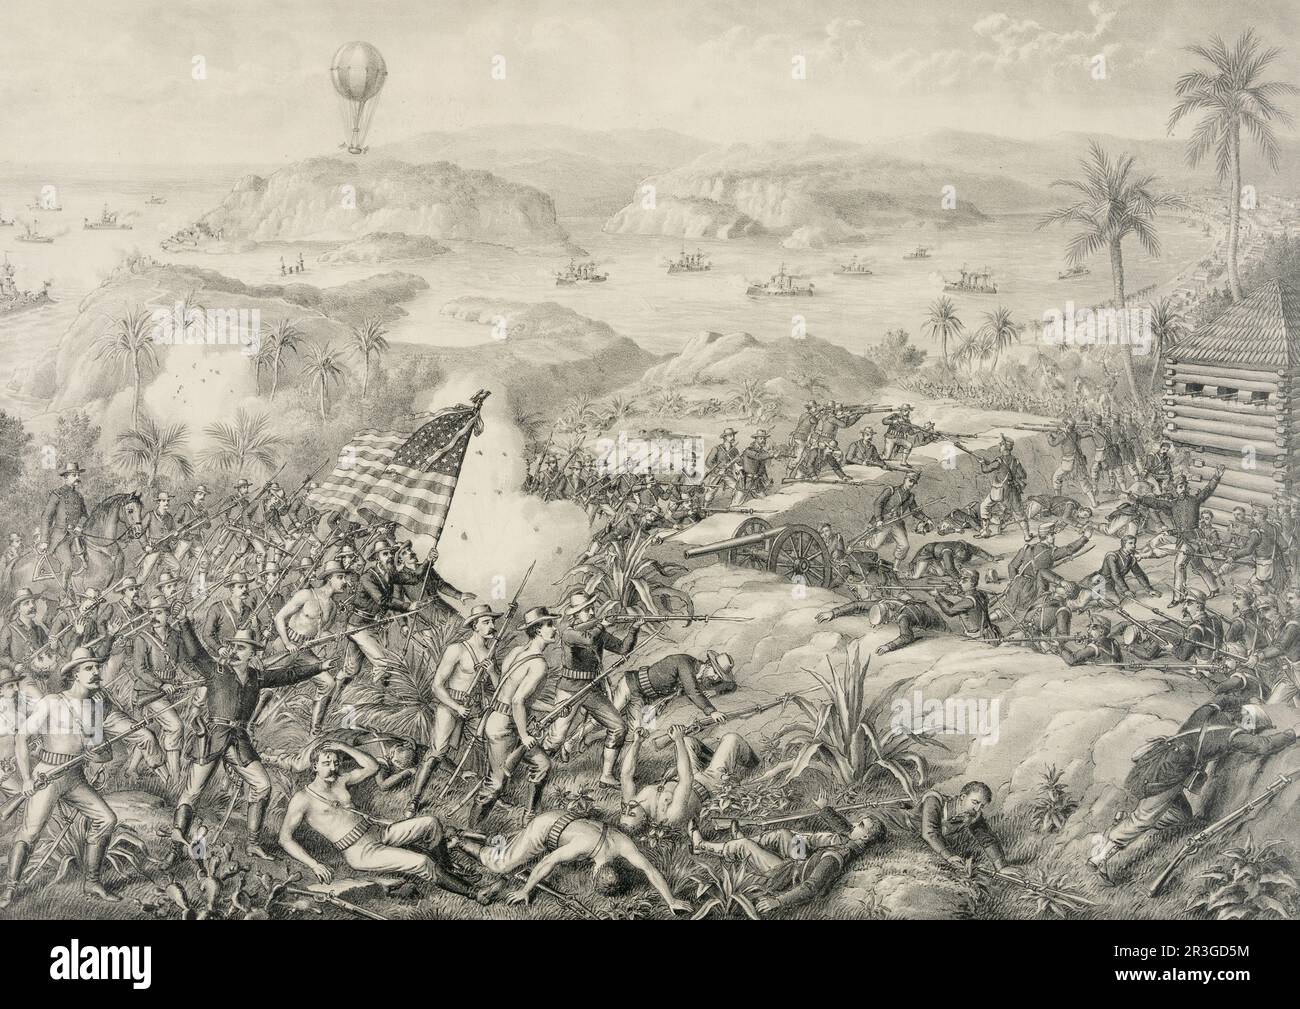 Capture of El Caney, El Paso & fortifications of Santiago, Cuba during the Spanish American War, 1898. Stock Photo